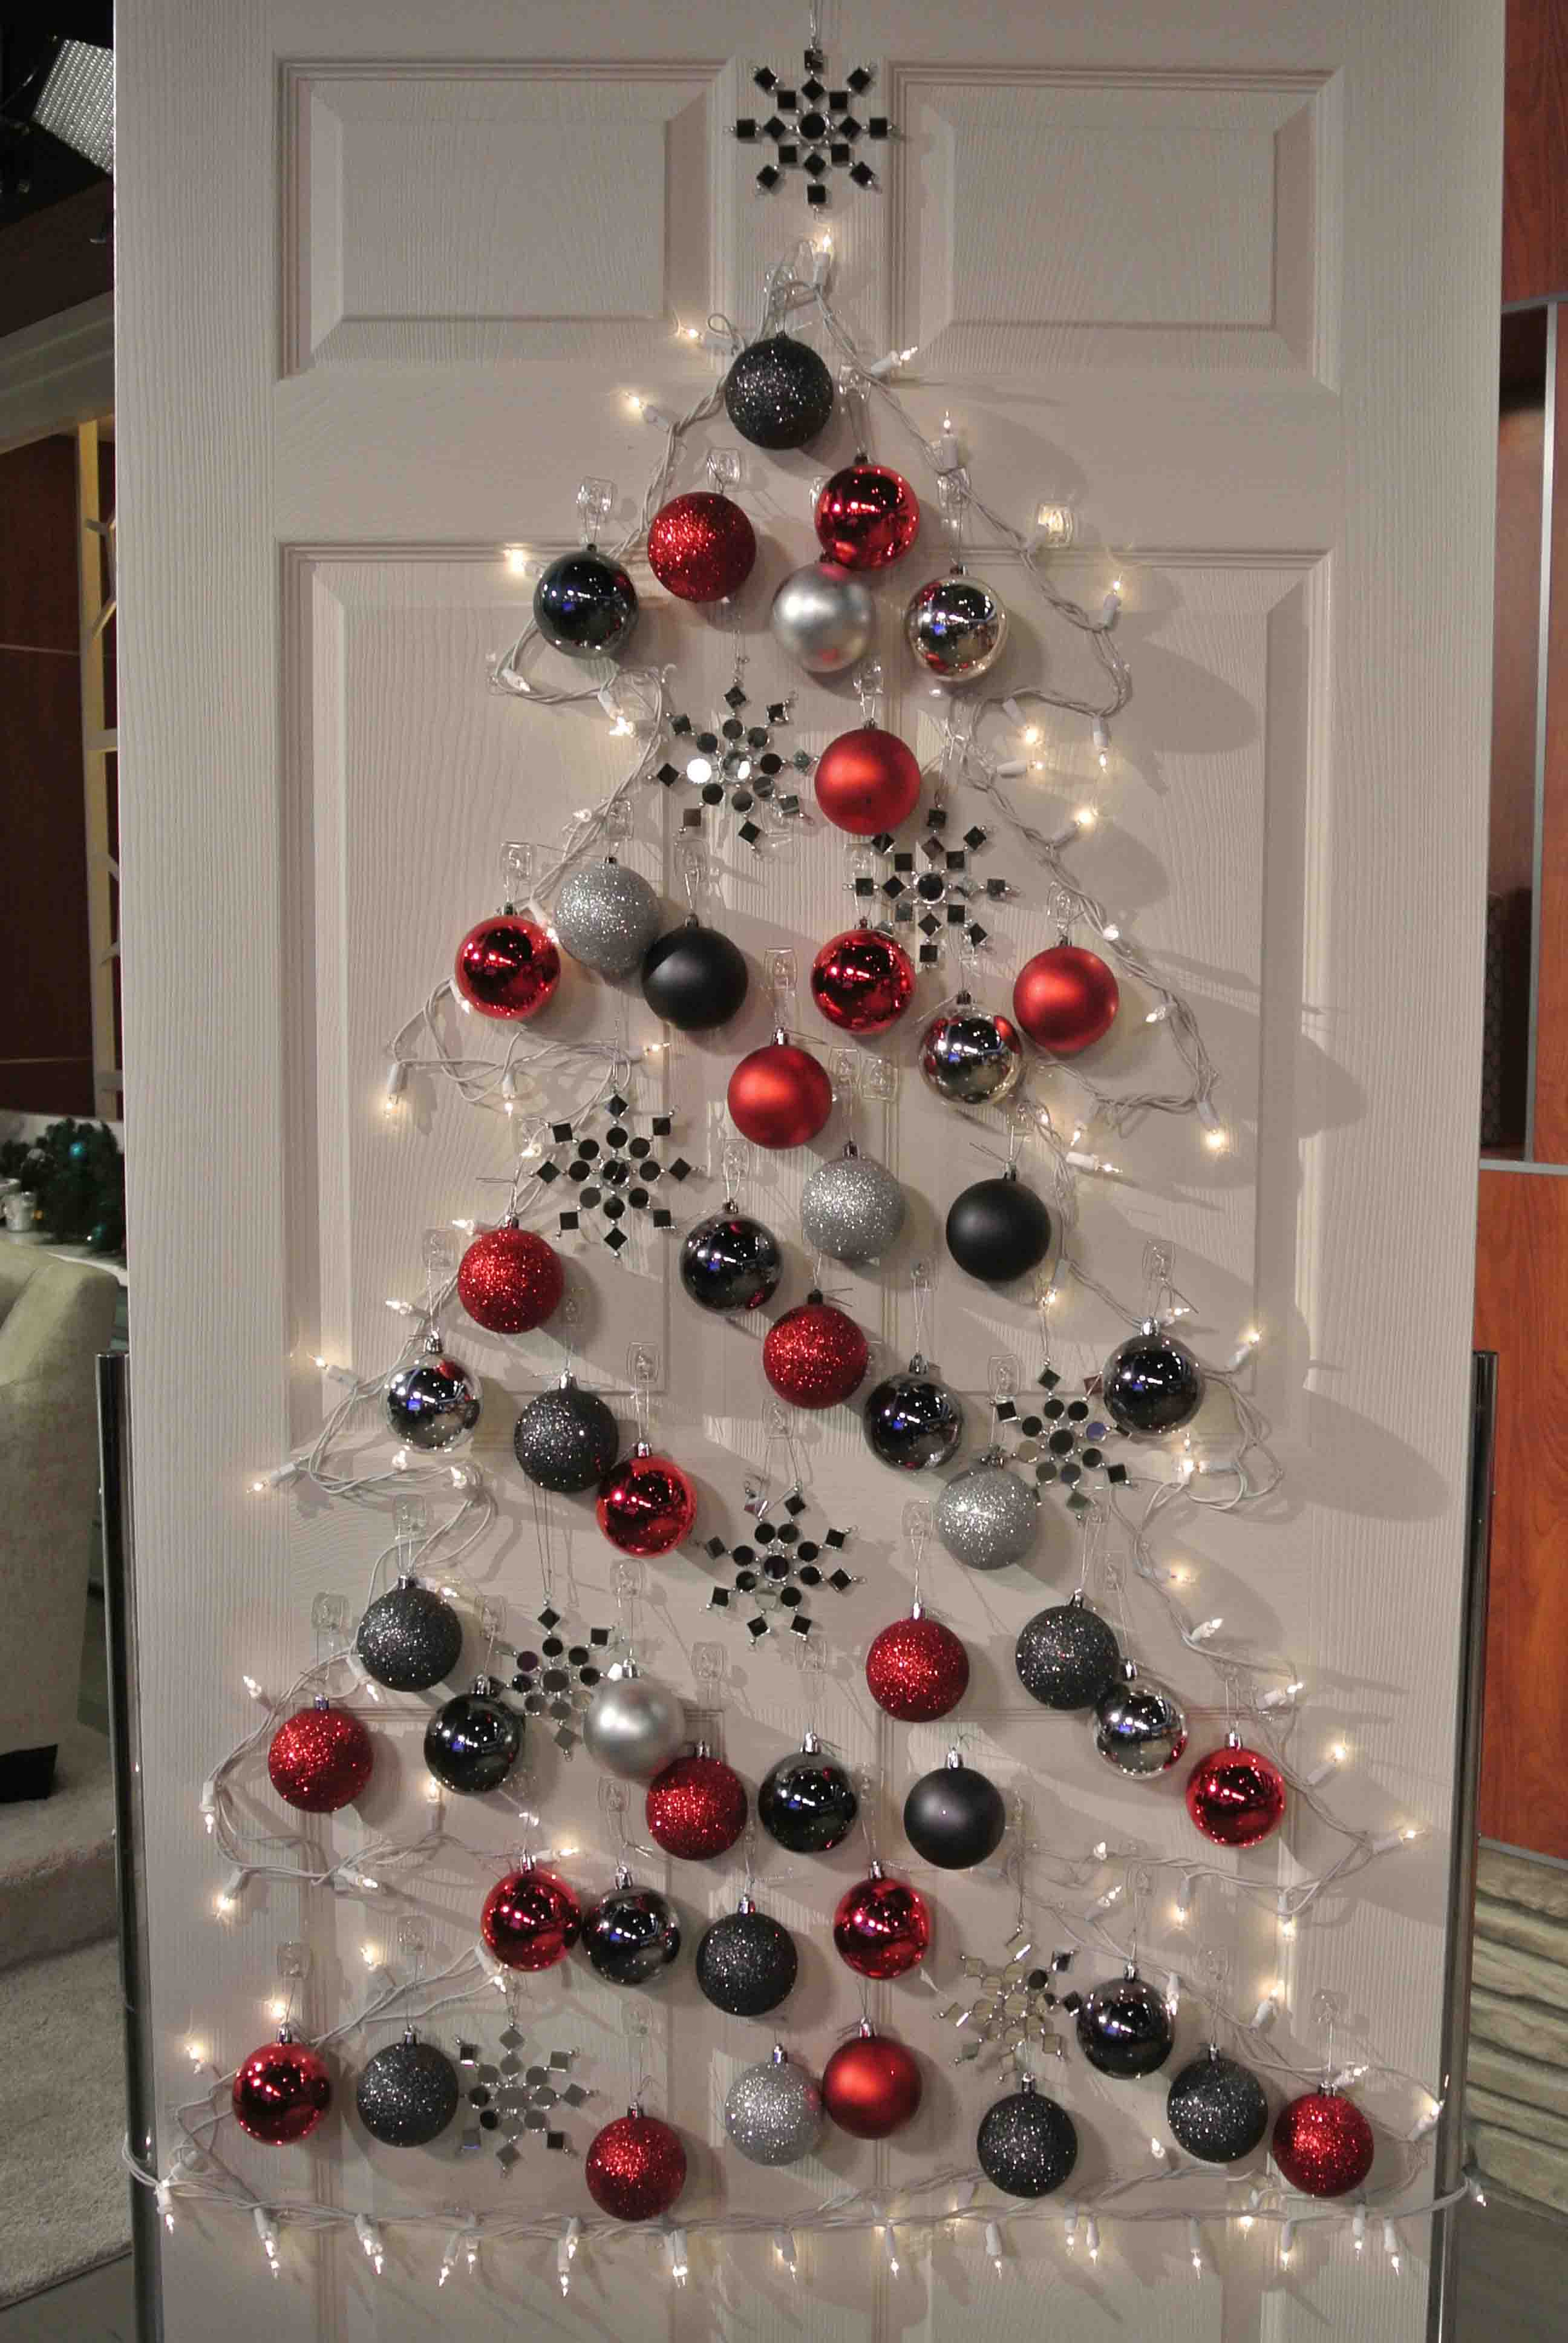 -Mesmerizing Door Creative Christmas Decor Ideas With Red White And Black Glossy Plastic Ball